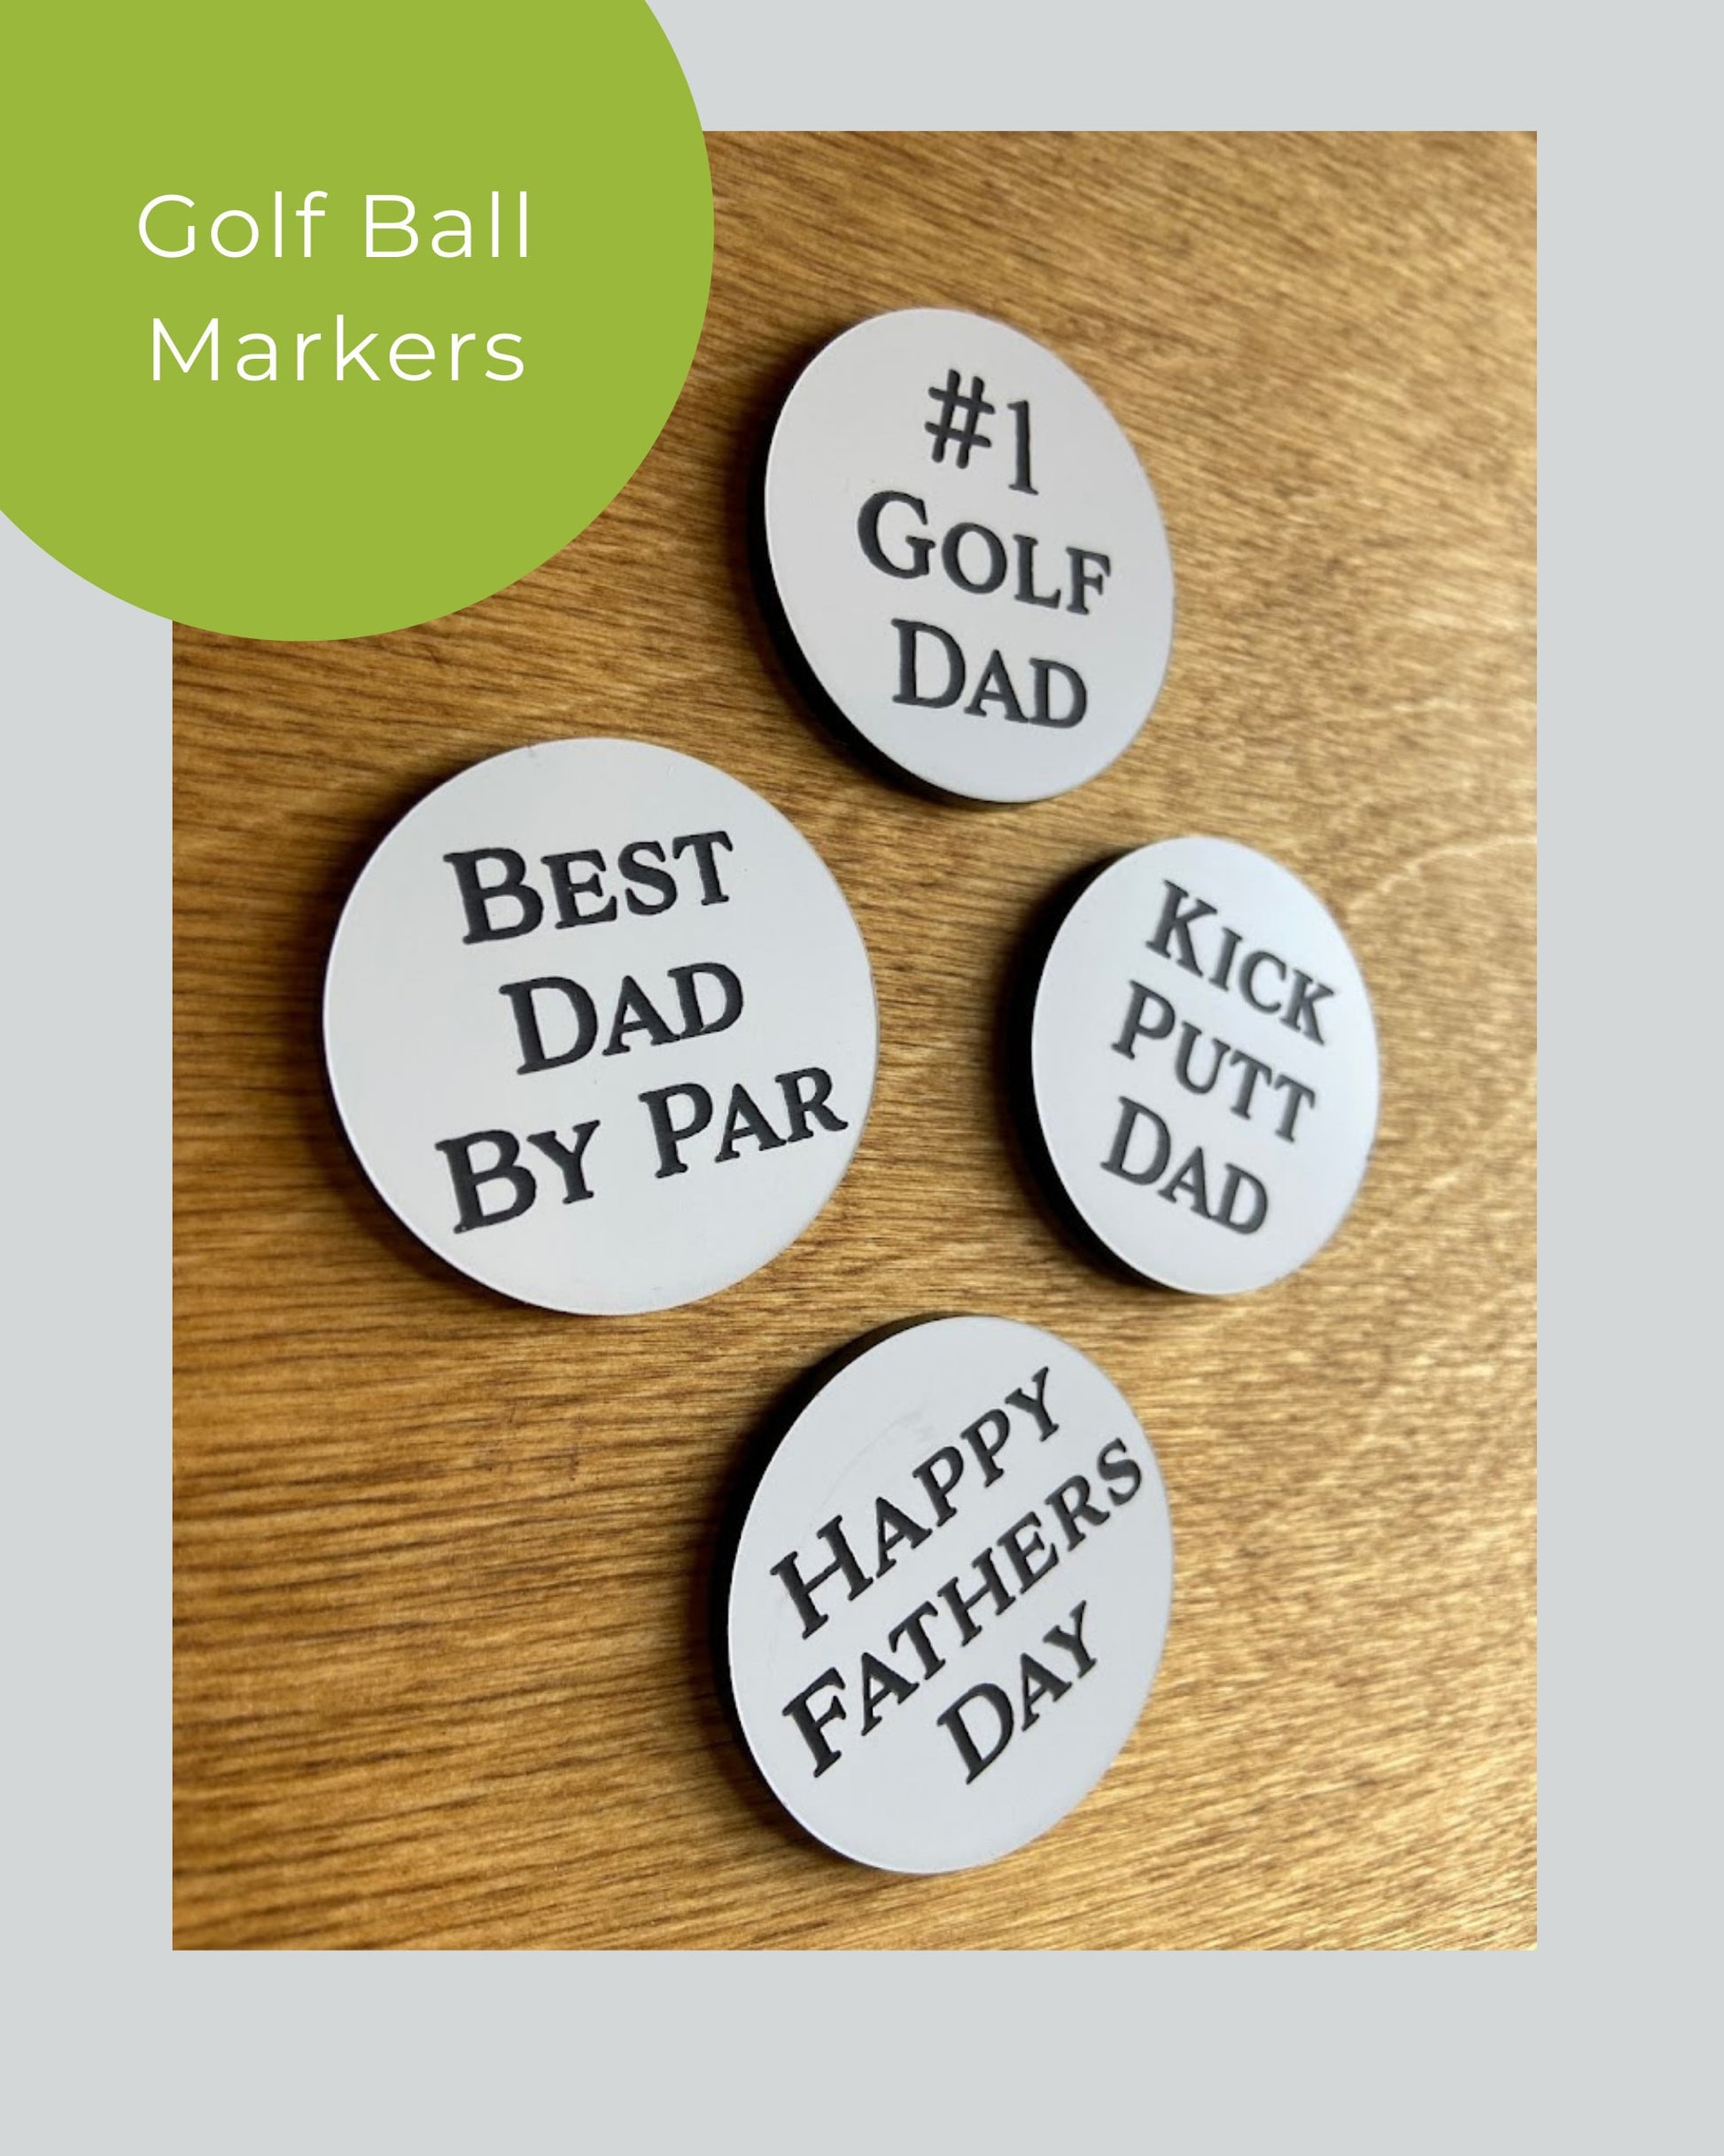 Fathers Day Golf Ball Markers | Funny Pun Set of 4 | Gift for Golfer | Golf Swag | Poker Chip Size